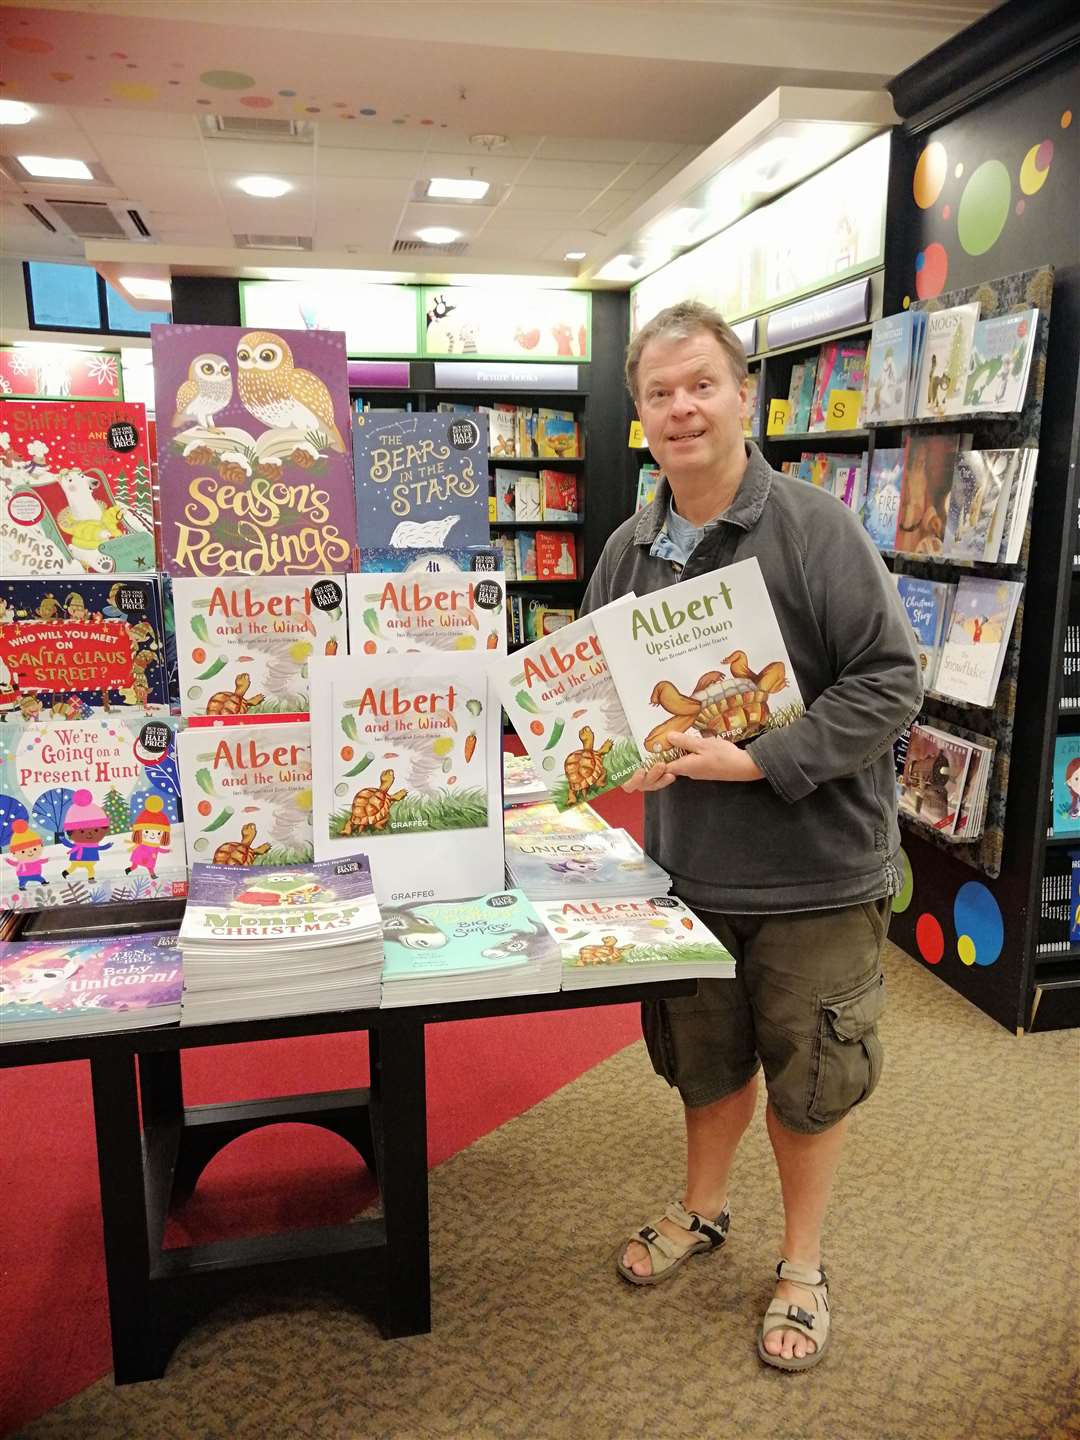 Ian Brown attended a book signing for his sequel picturebook 'Albert in the Wind'